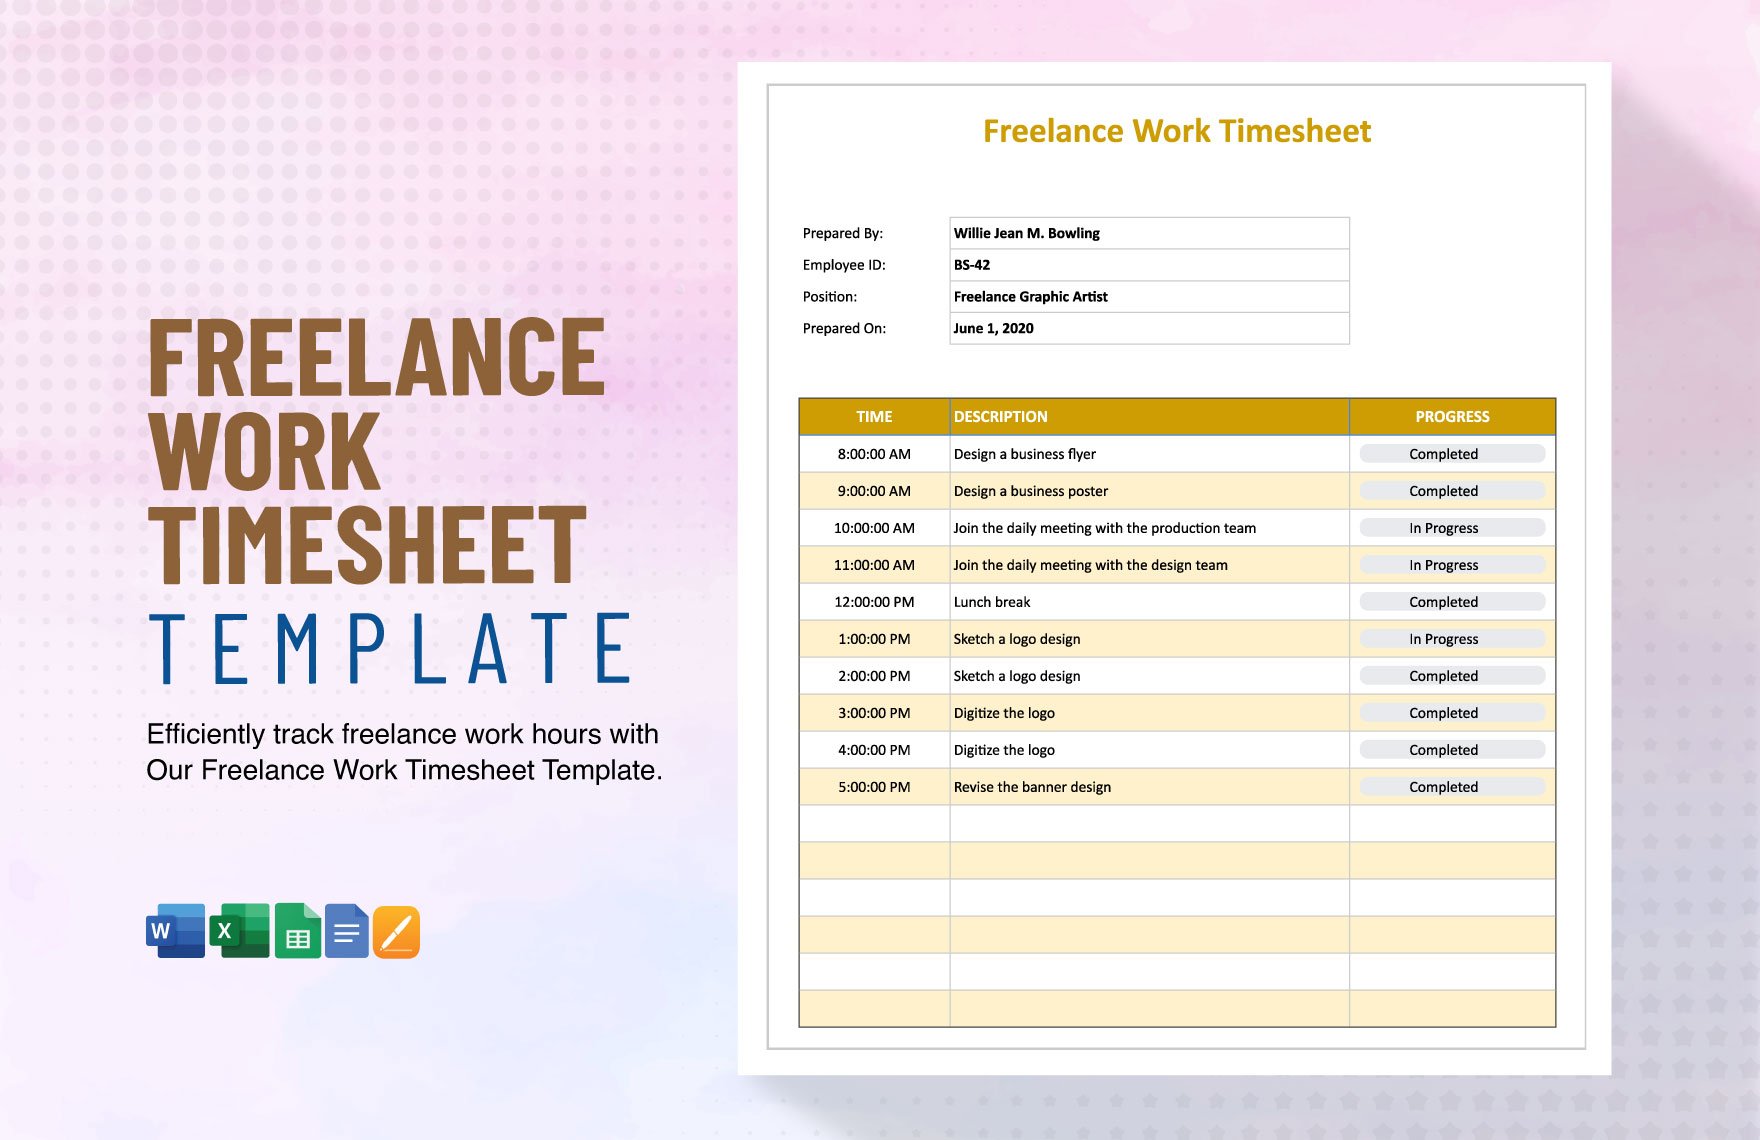 Freelance Work Timesheet Template in Word, Google Docs, Excel, Google Sheets, Apple Pages